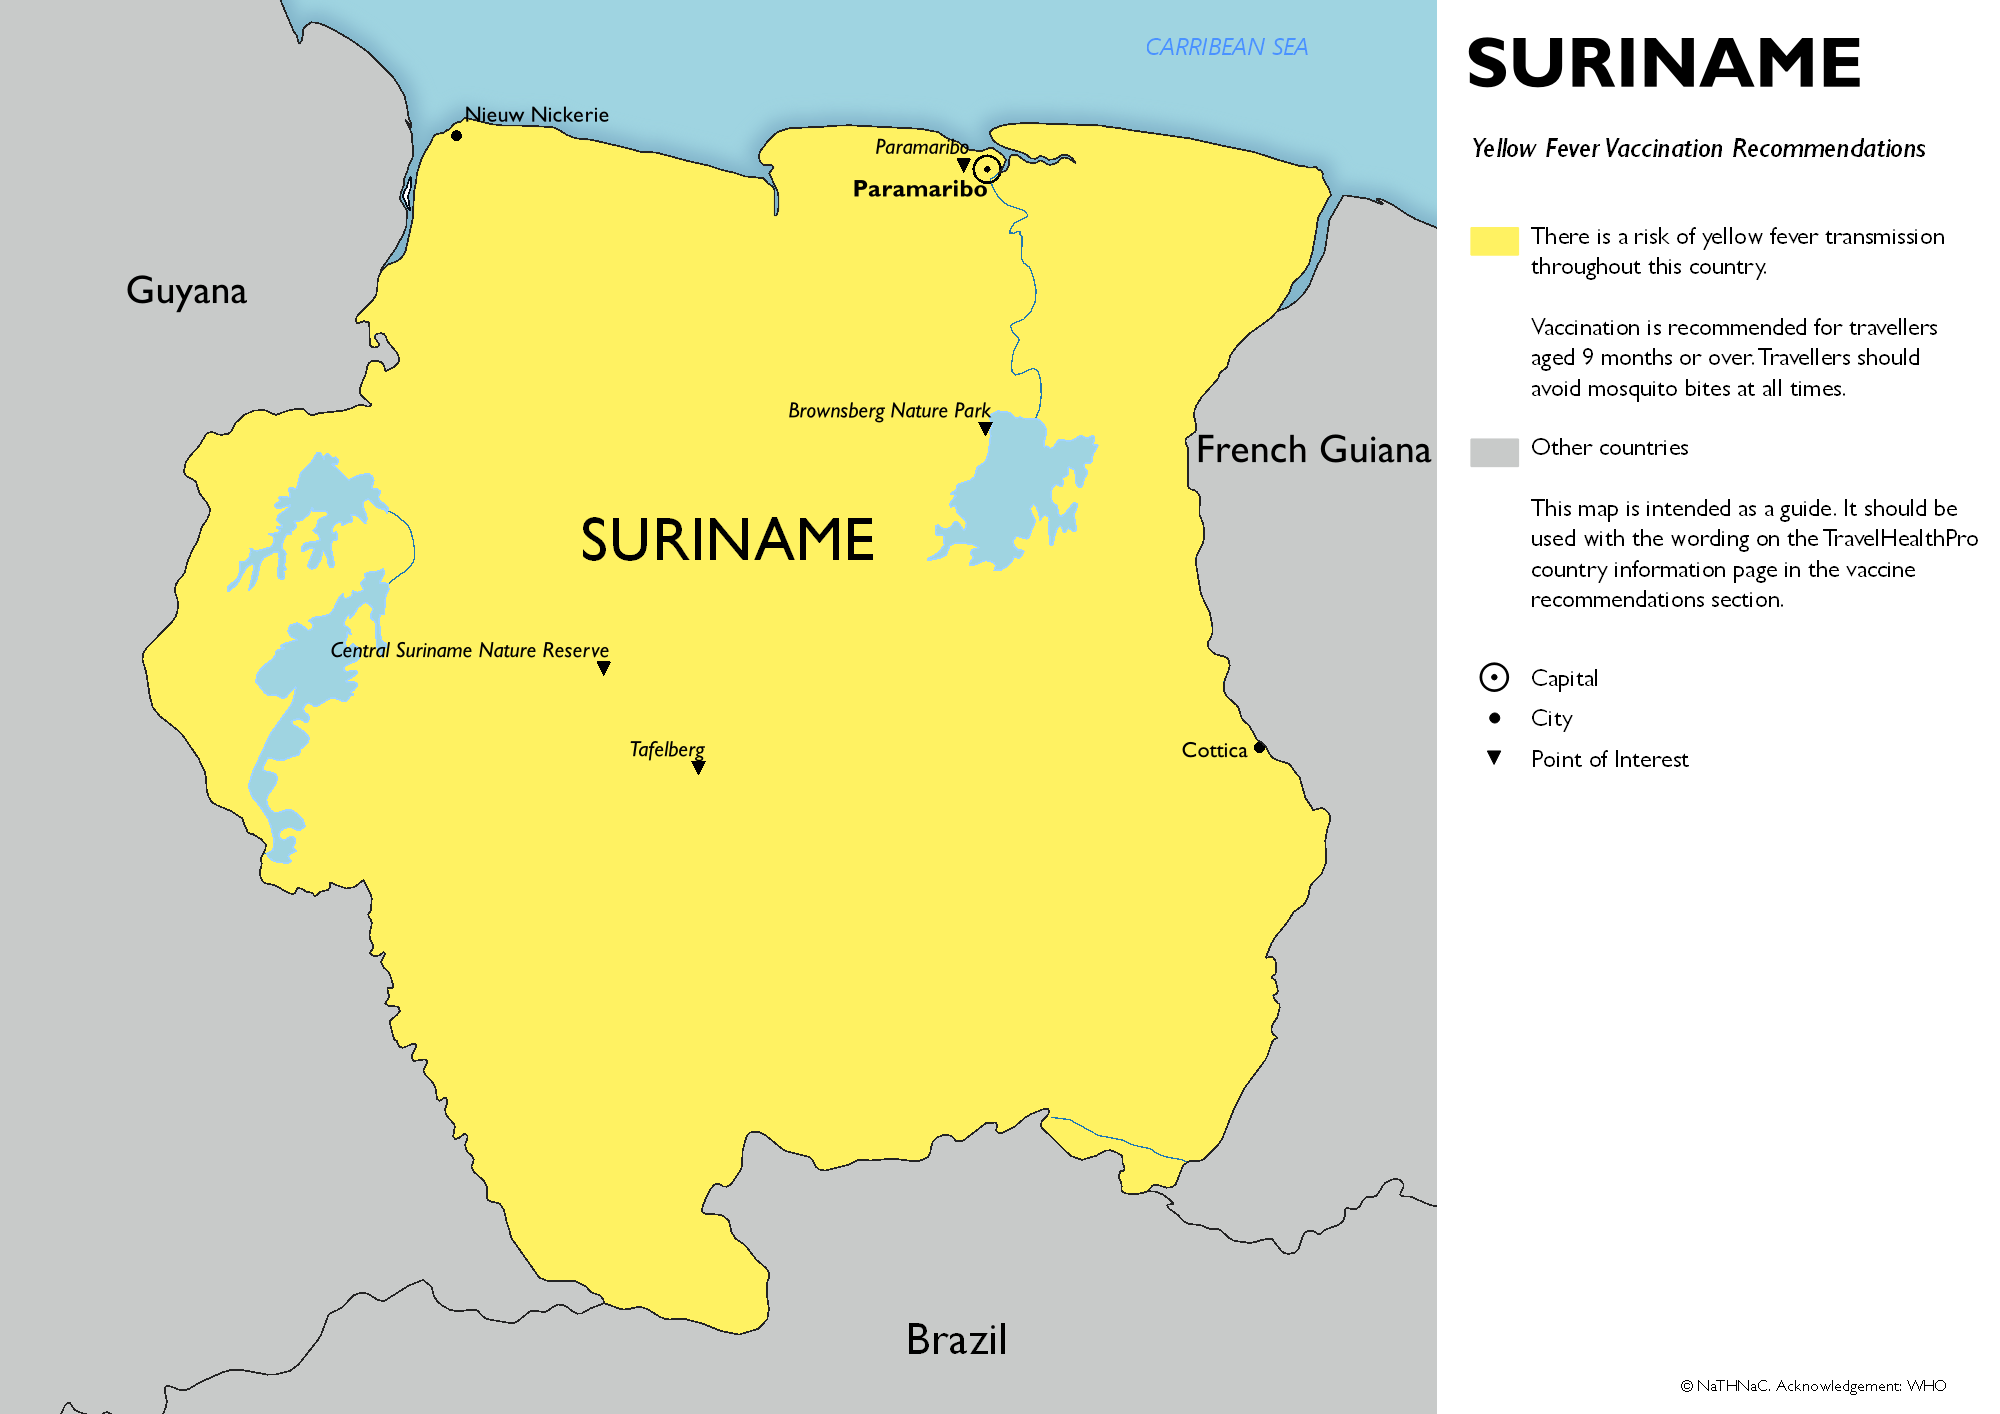 Yellow fever vaccine recommendation map for Suriname